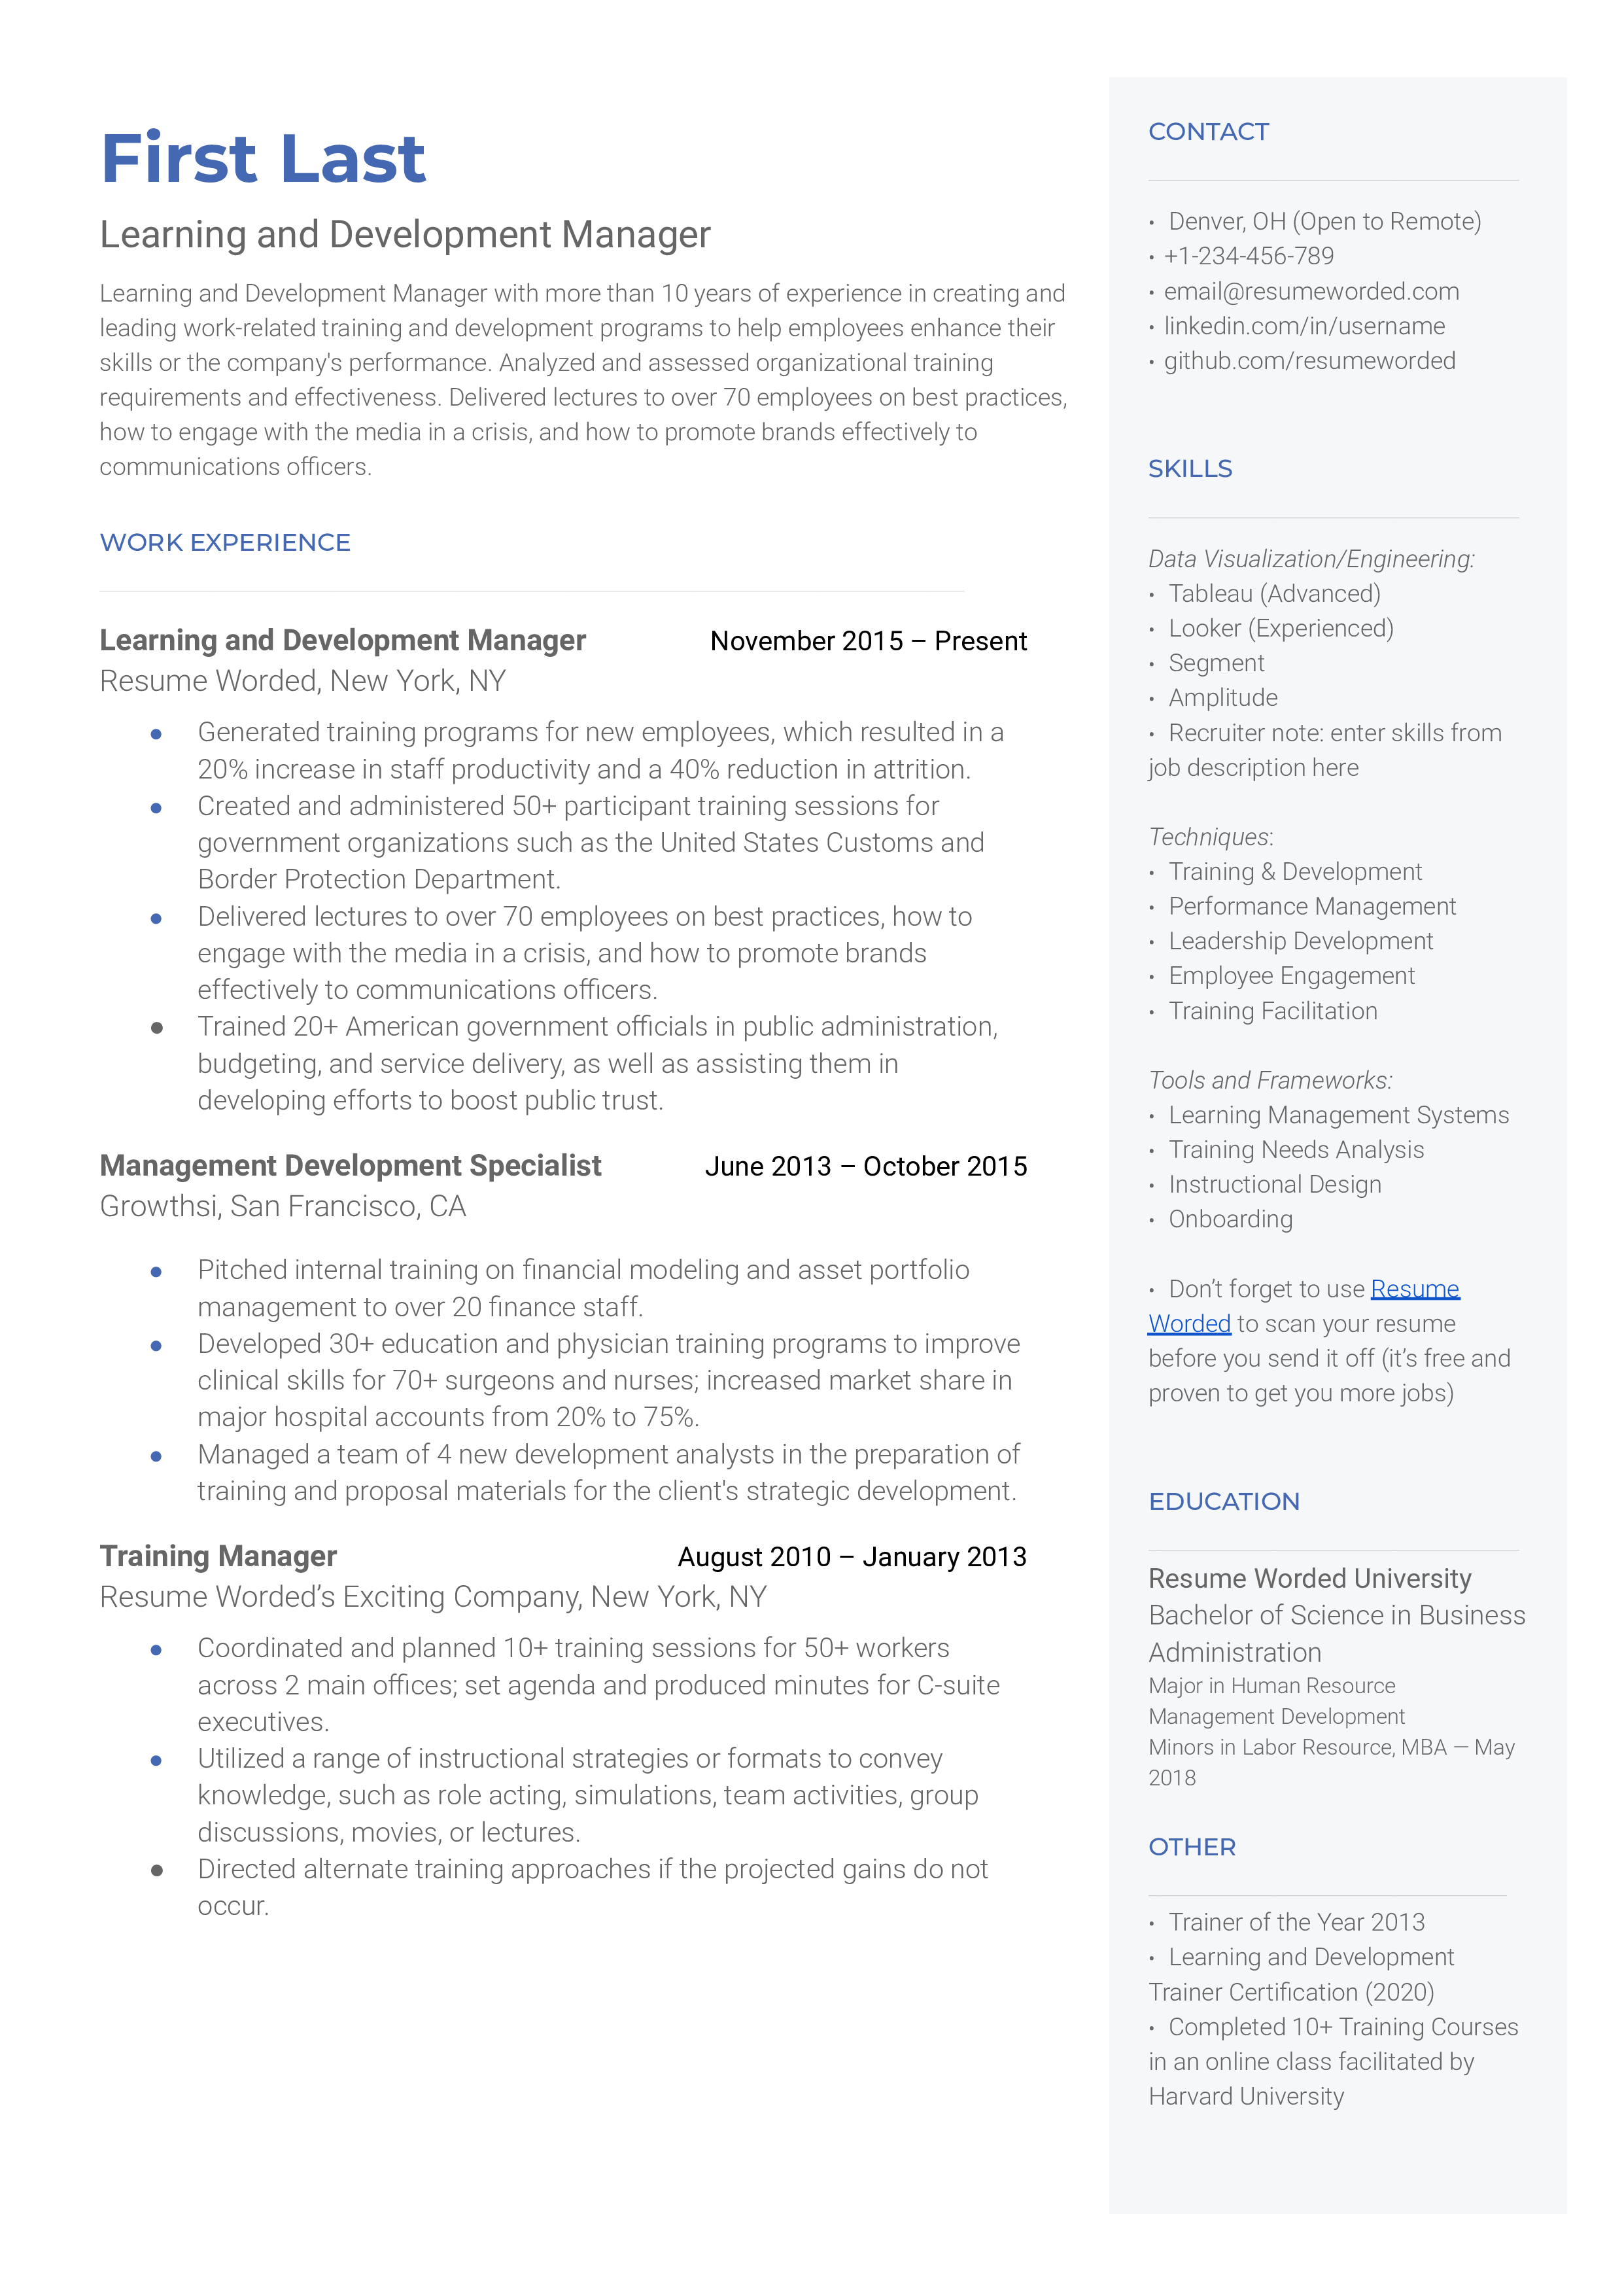 Learning and Development Manager Resume Template + Example